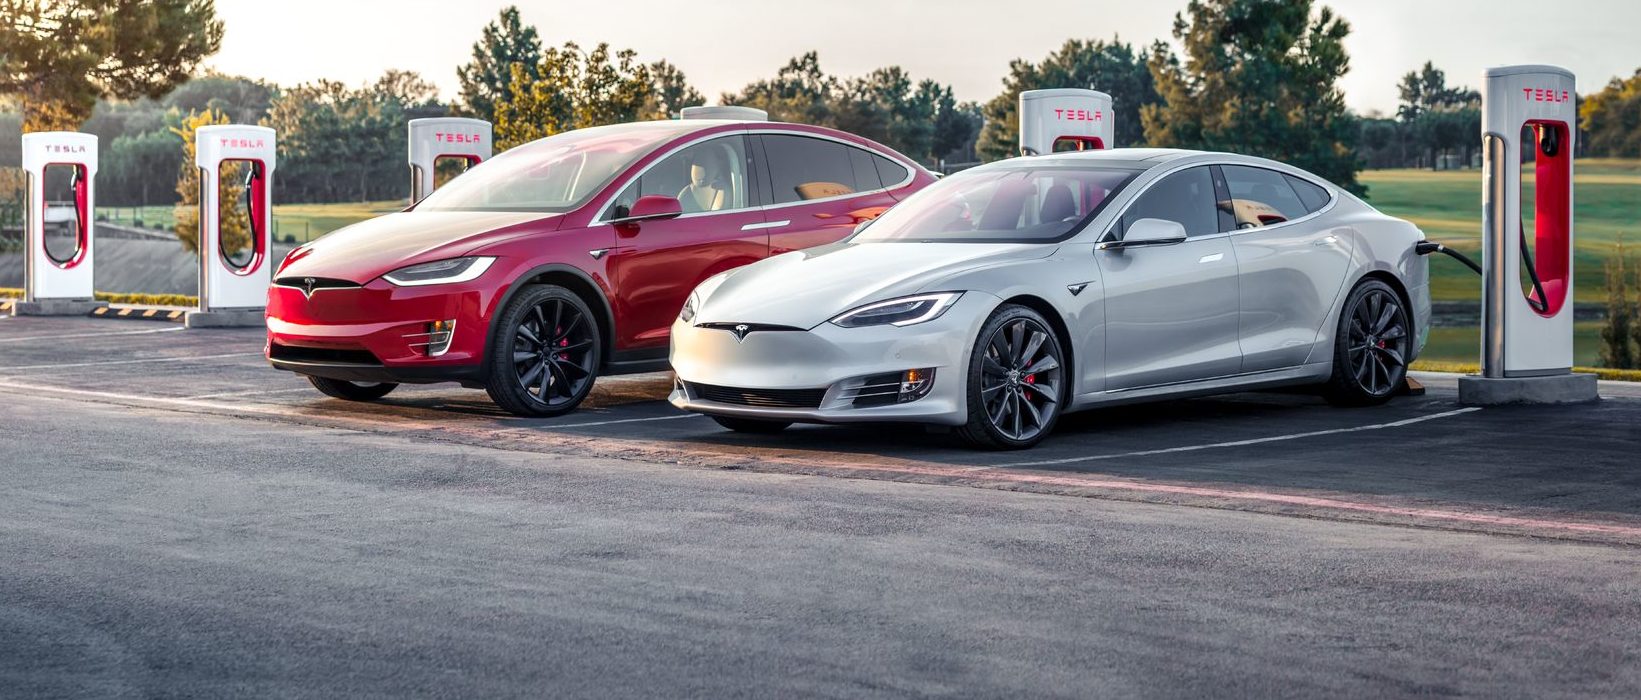 Tesla offers $5k to eliminate Free Supercharging but is it enough?